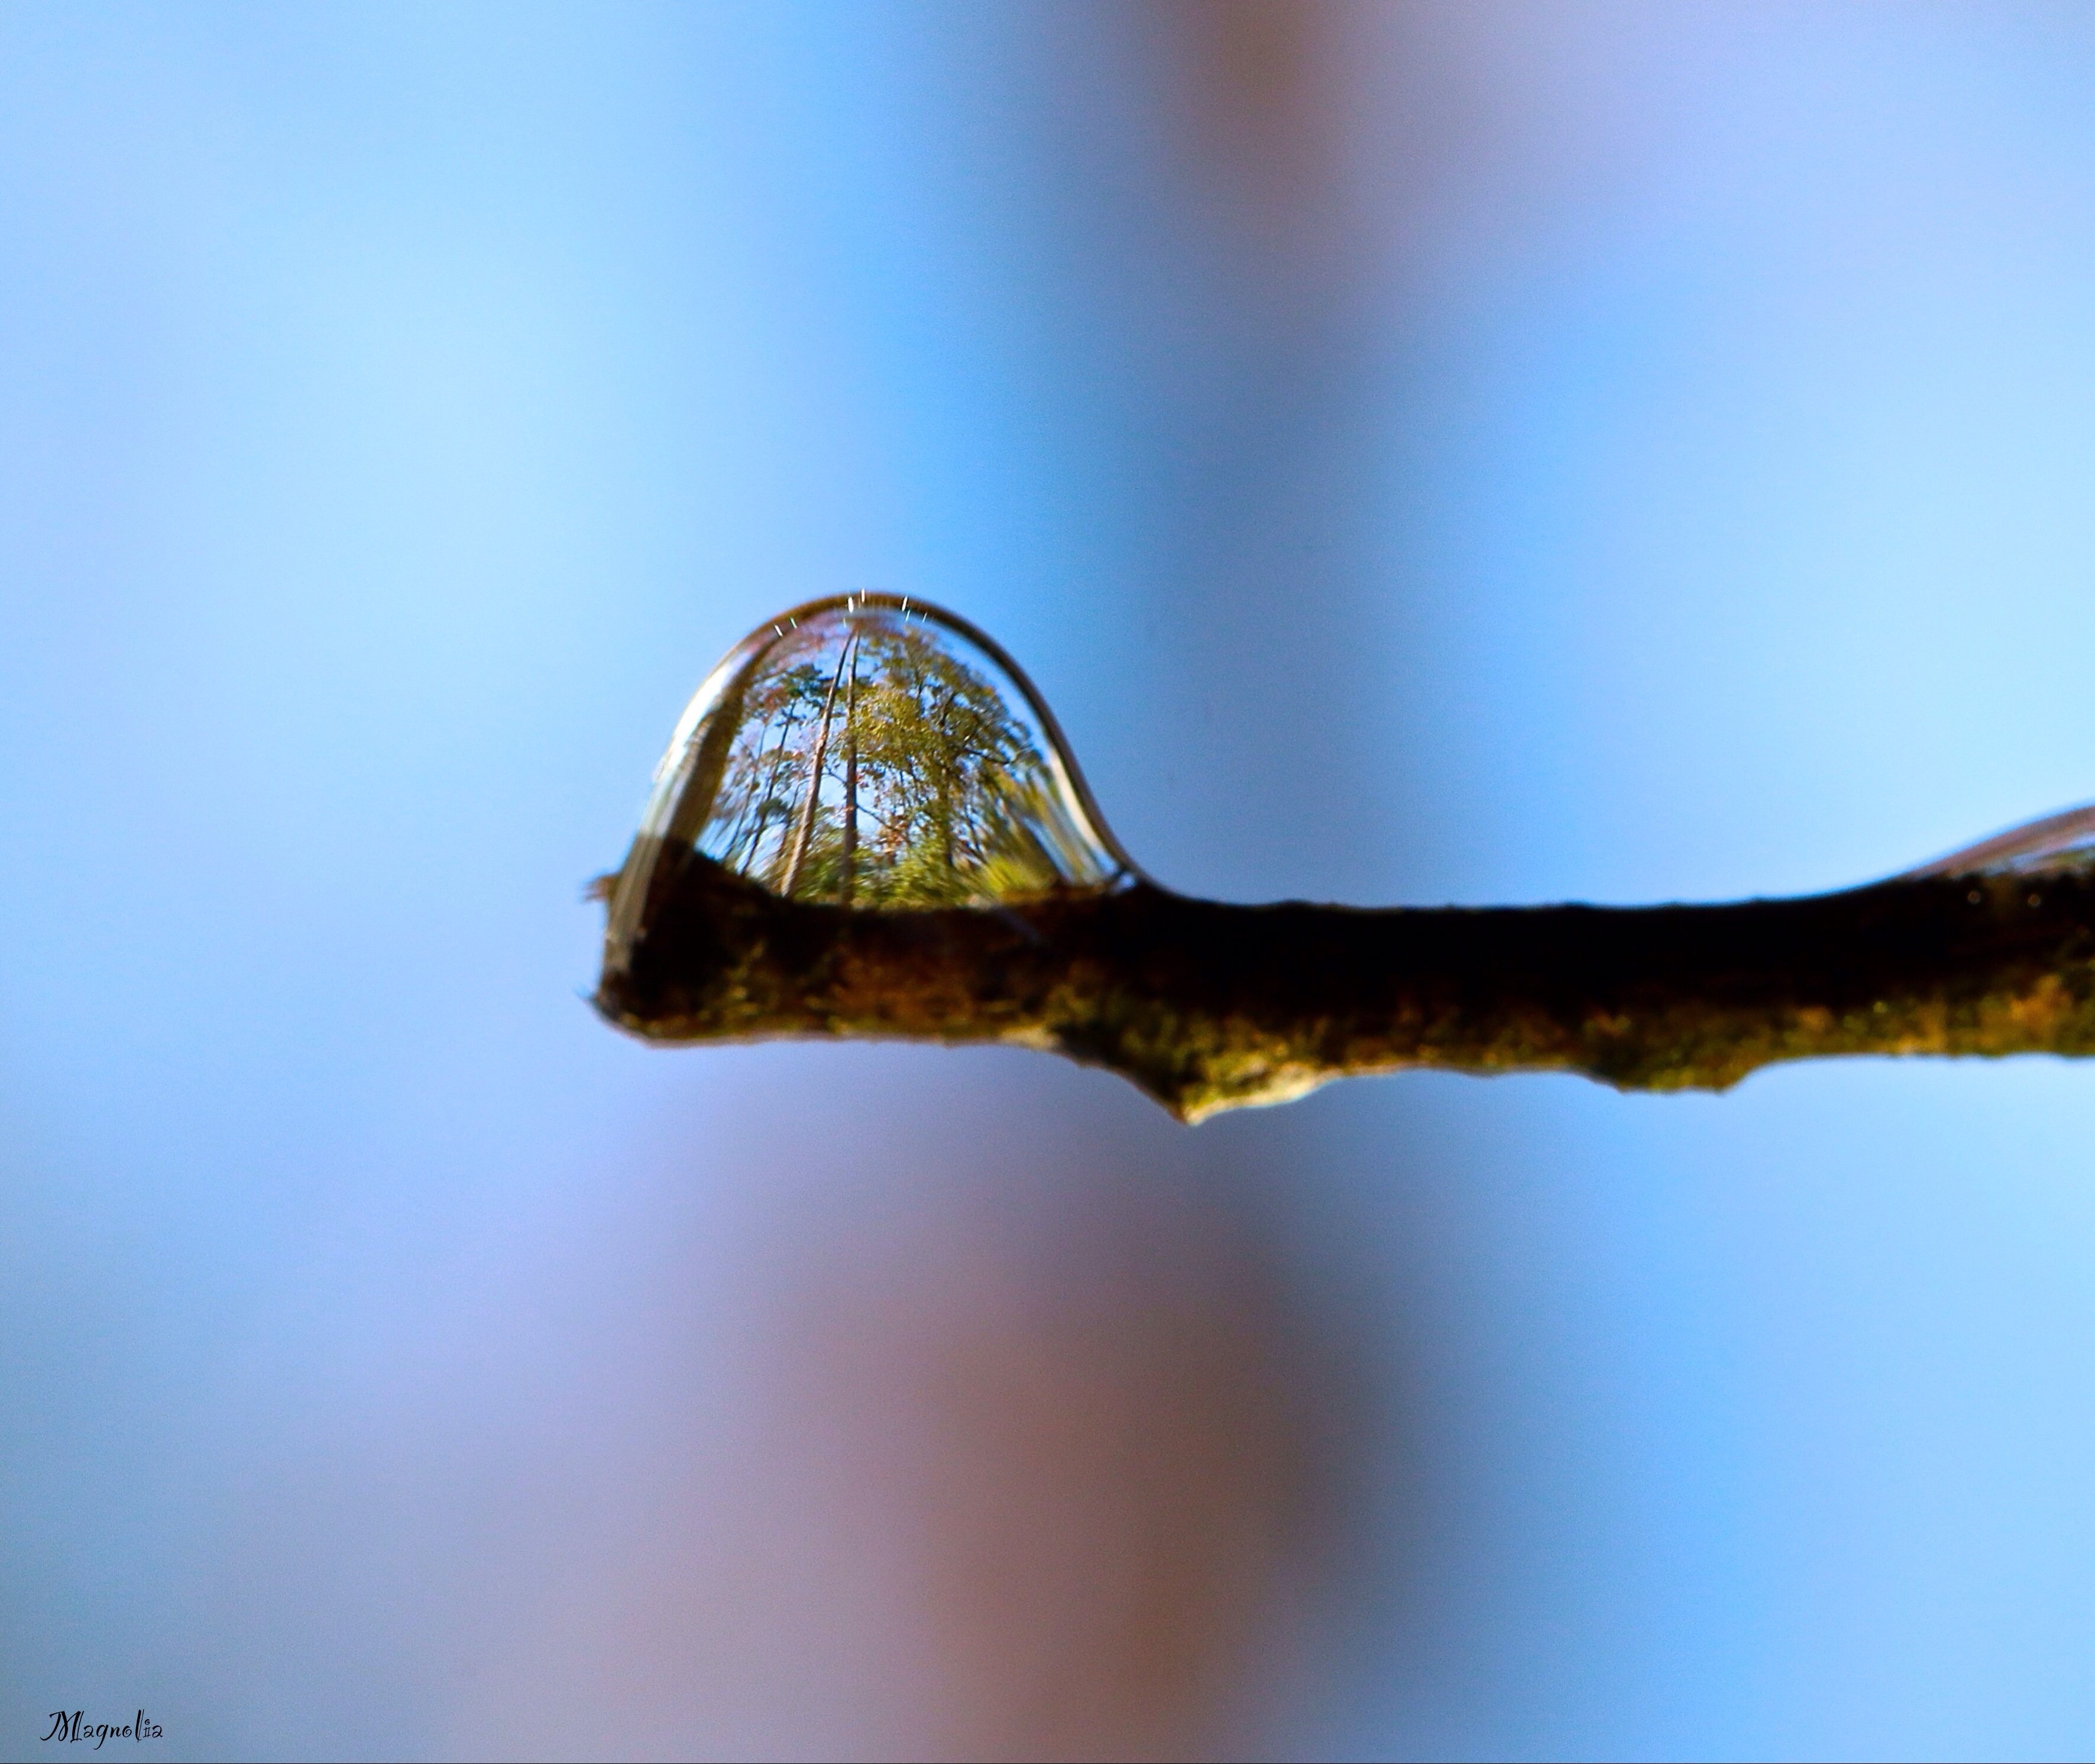 dank meme of forest refracted in a drop of water